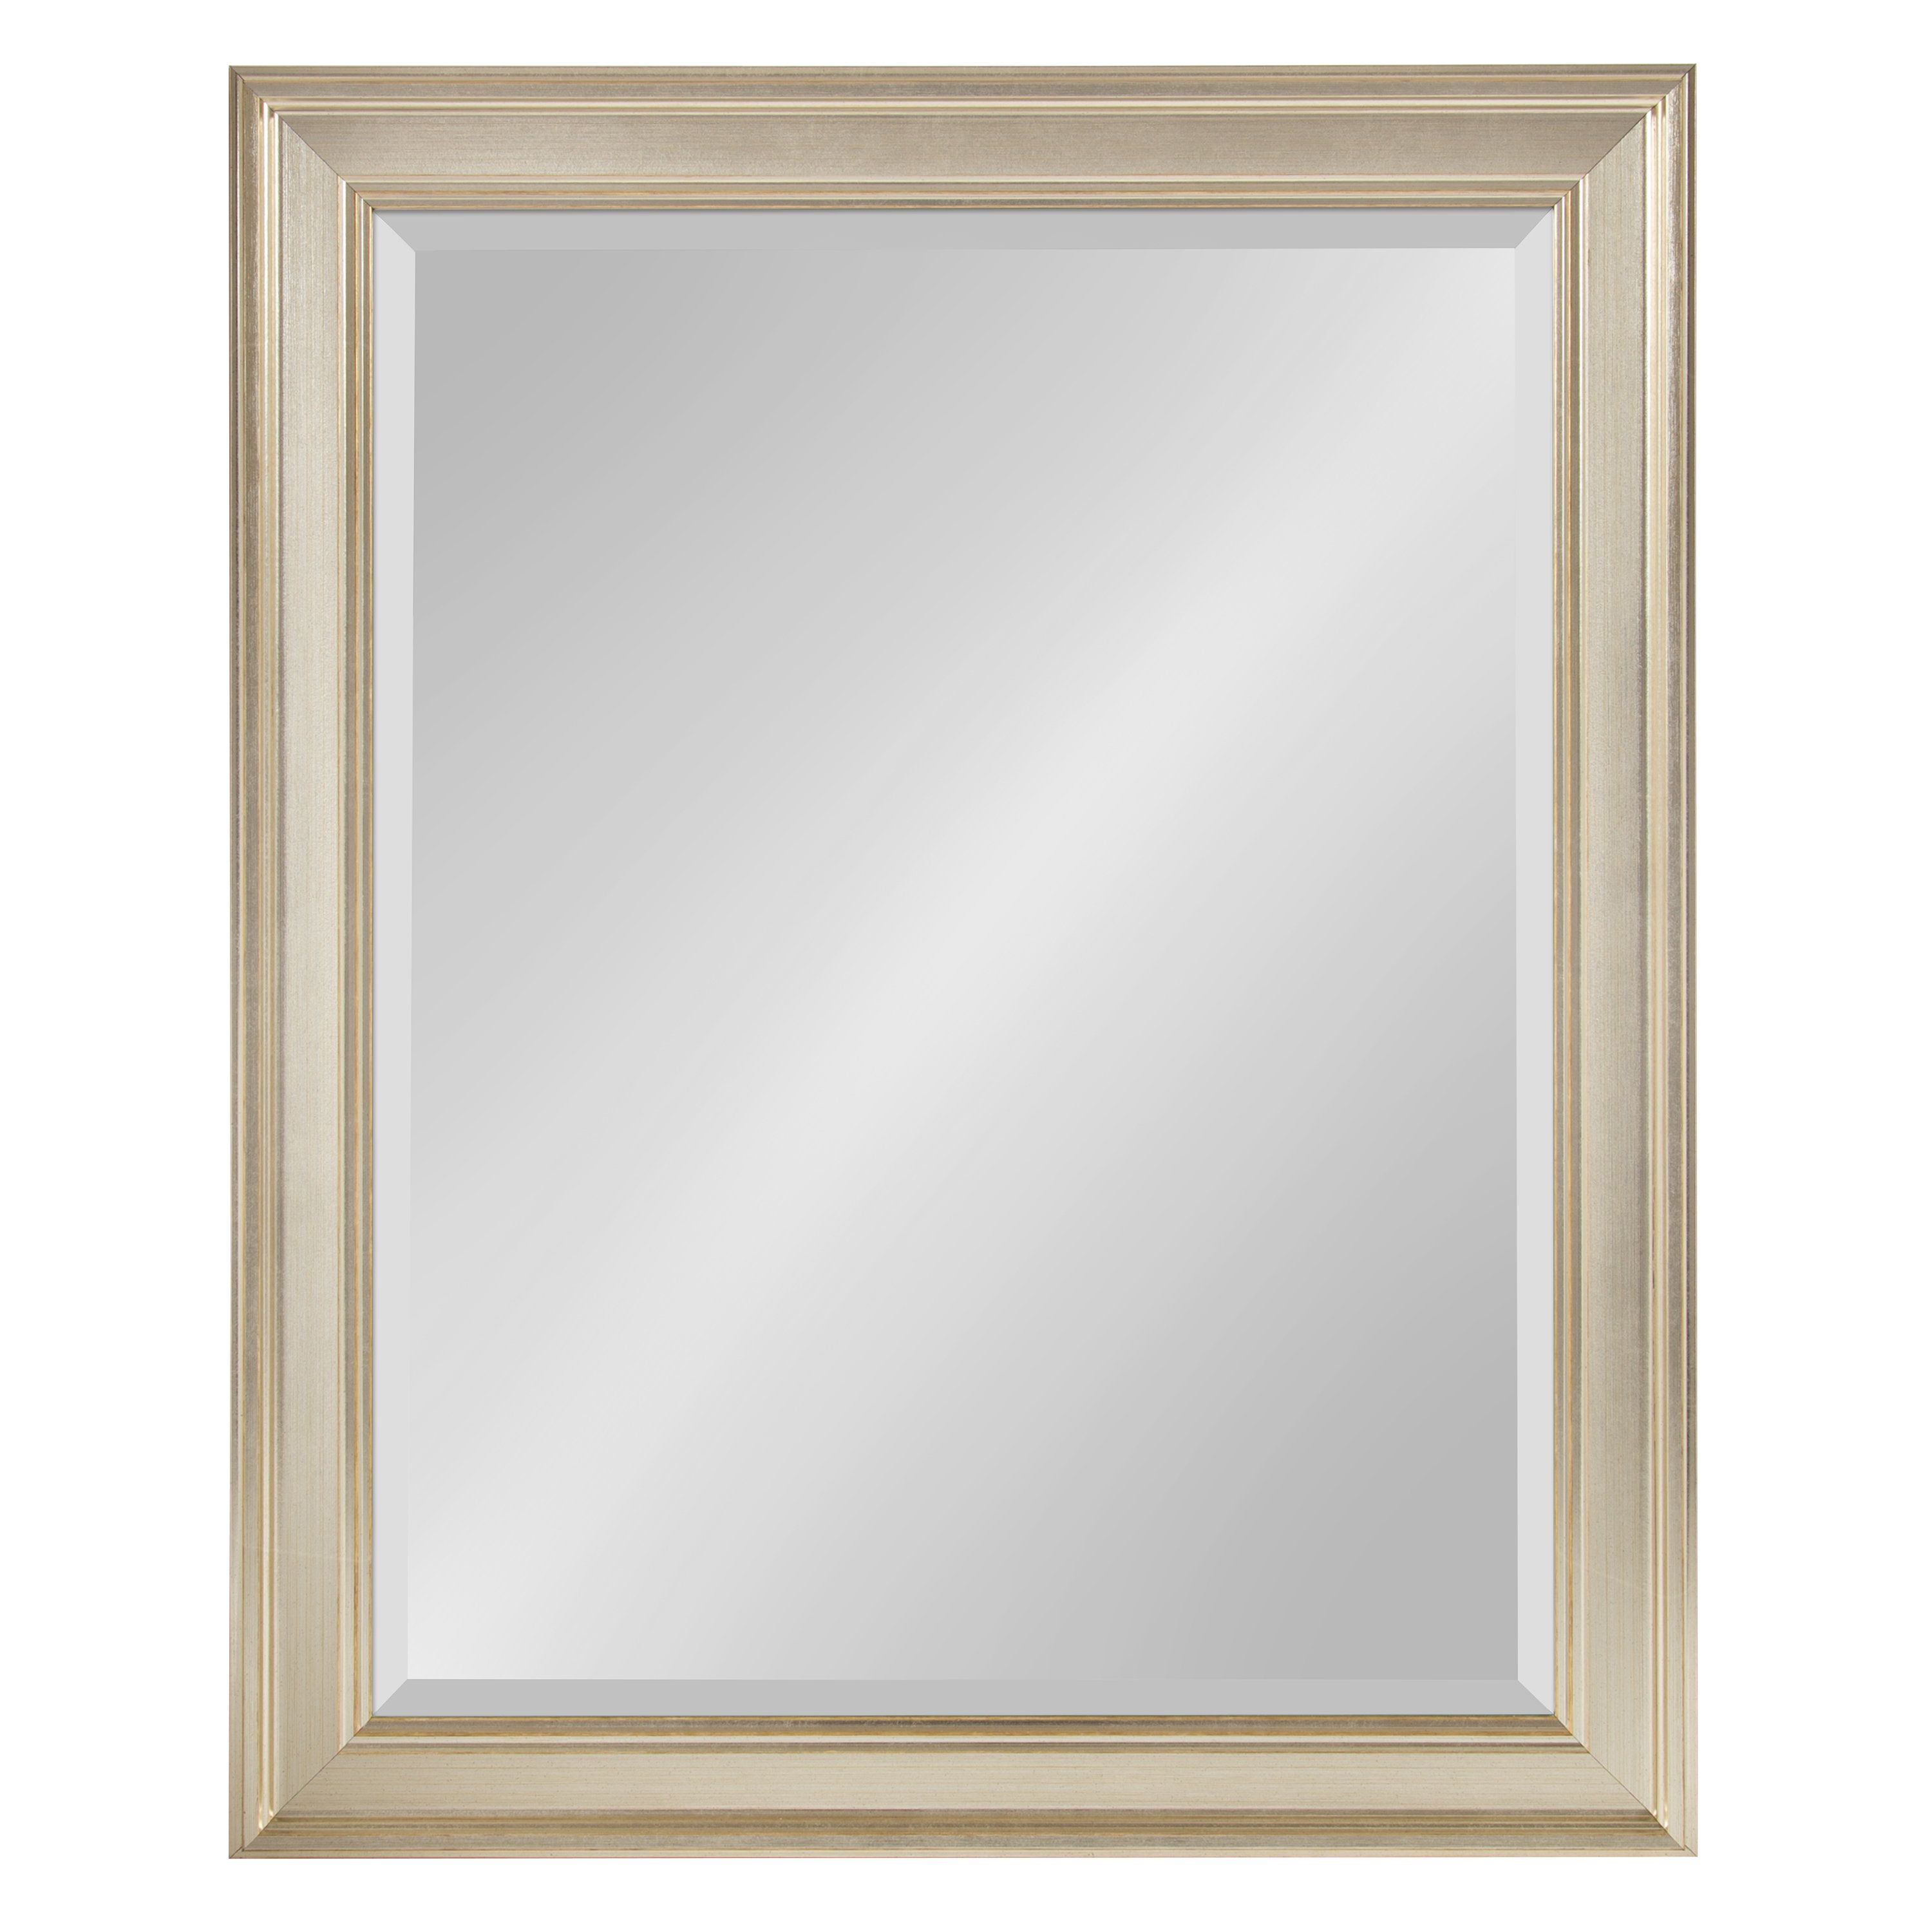 Salter Framed Rectangle Accent Mirror & Reviews | Joss & Main In Northcutt Accent Mirrors (View 28 of 30)